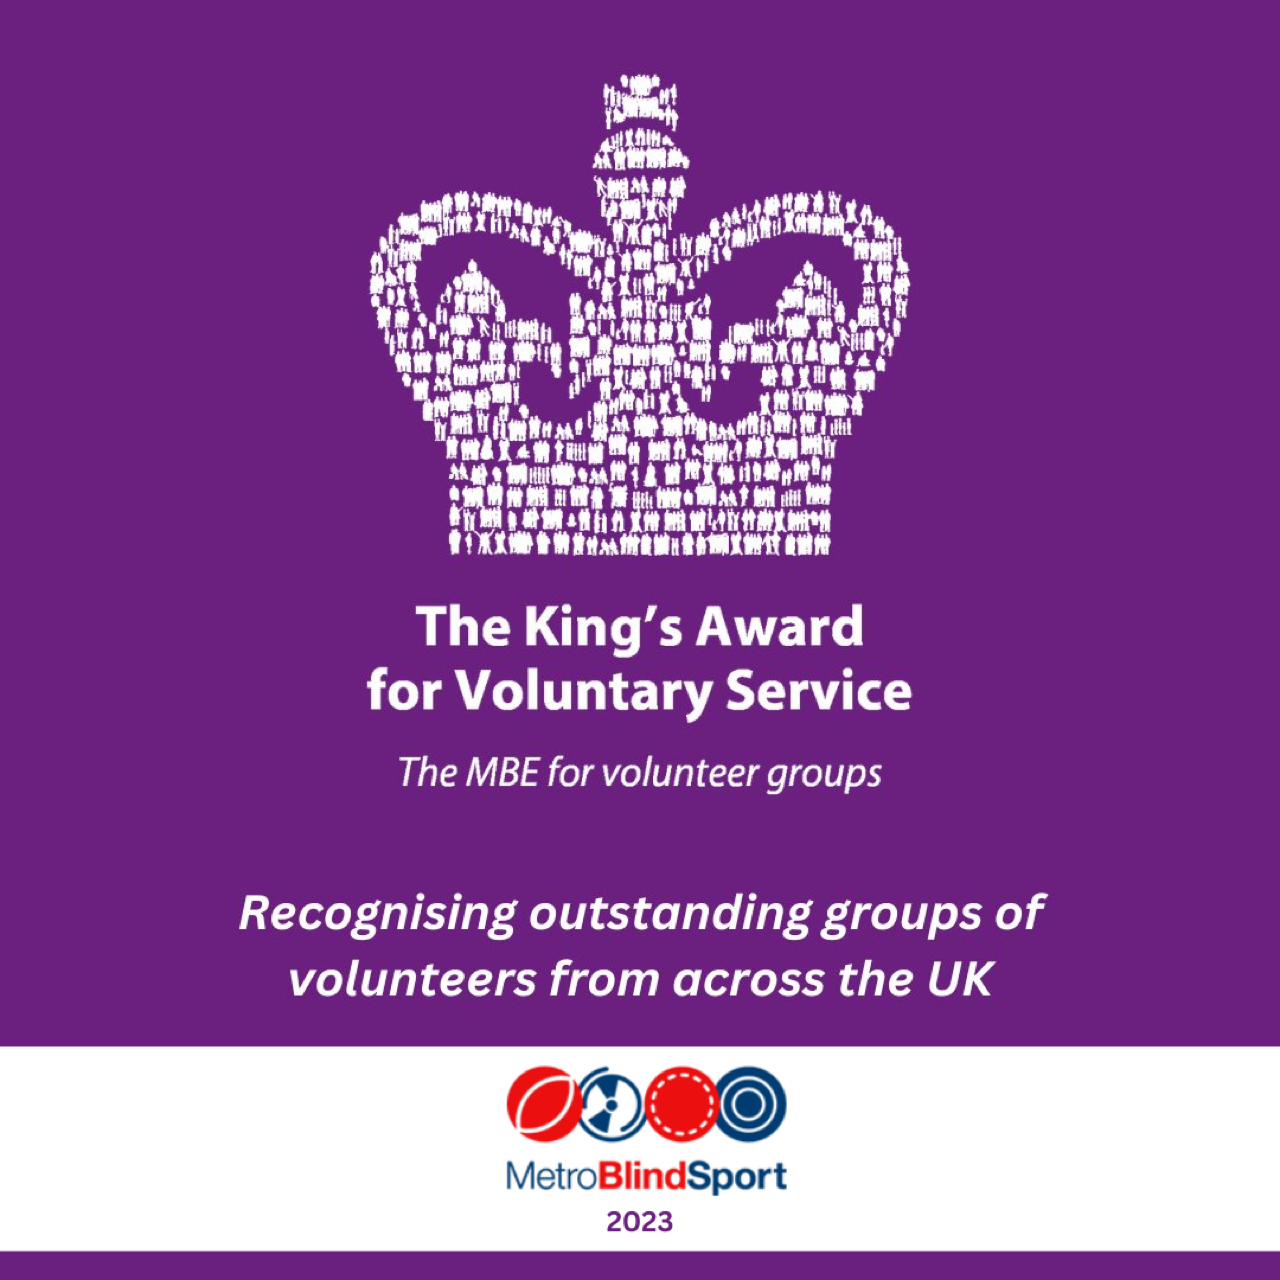 The King's Award for Voluntary Service. The MBE for voluntary groups. Recognising outstanding groups of volunteers from across the UK. Metro Blind Sport logo. 2023.